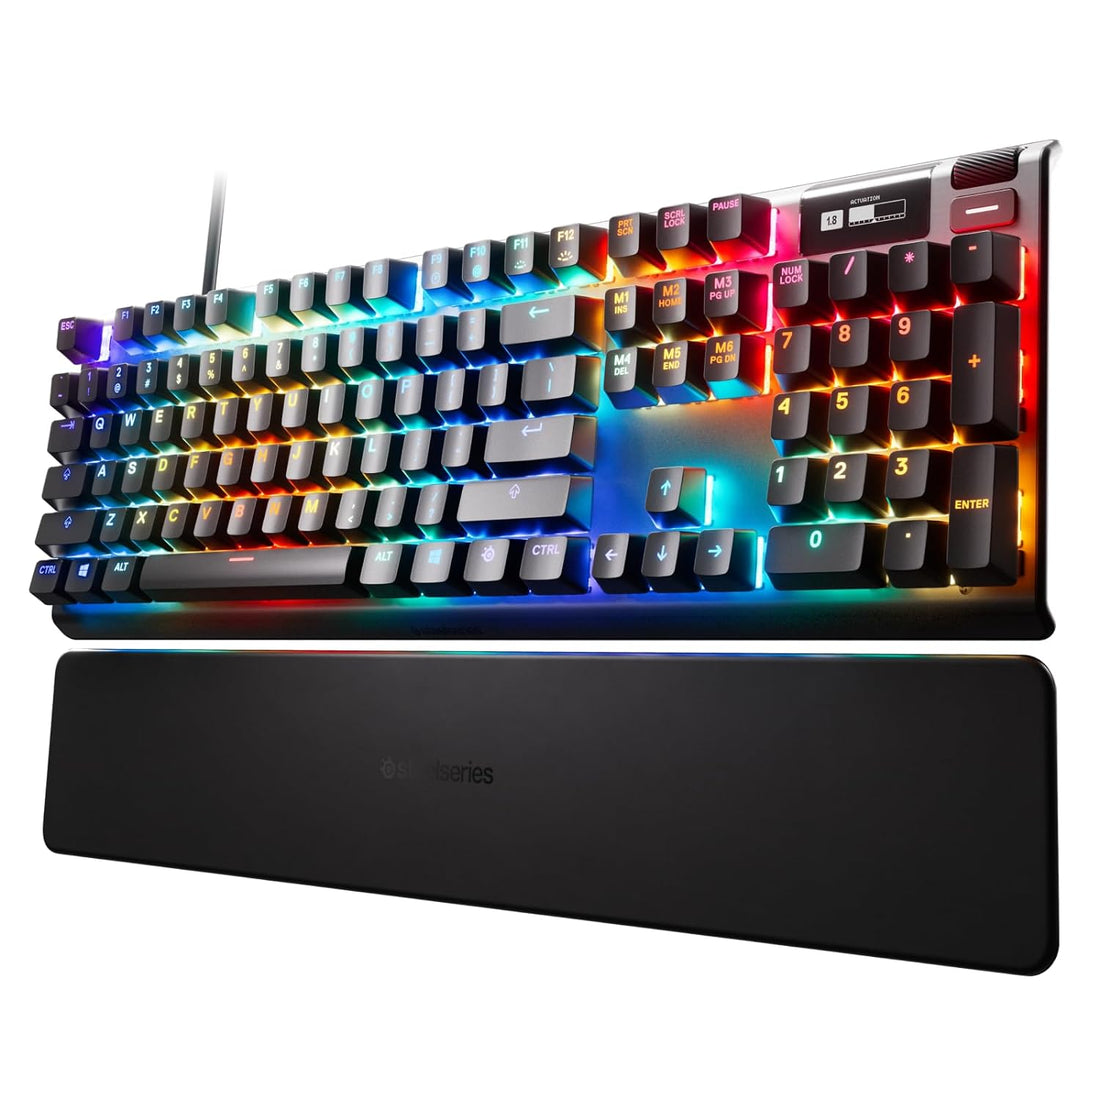 SteelSeries Apex Pro Mechanical Gaming Keyboard – Adjustable Actuation Switches – World’s Fastest Mechanical Keyboard – OLED Smart Display – RGB Backlit